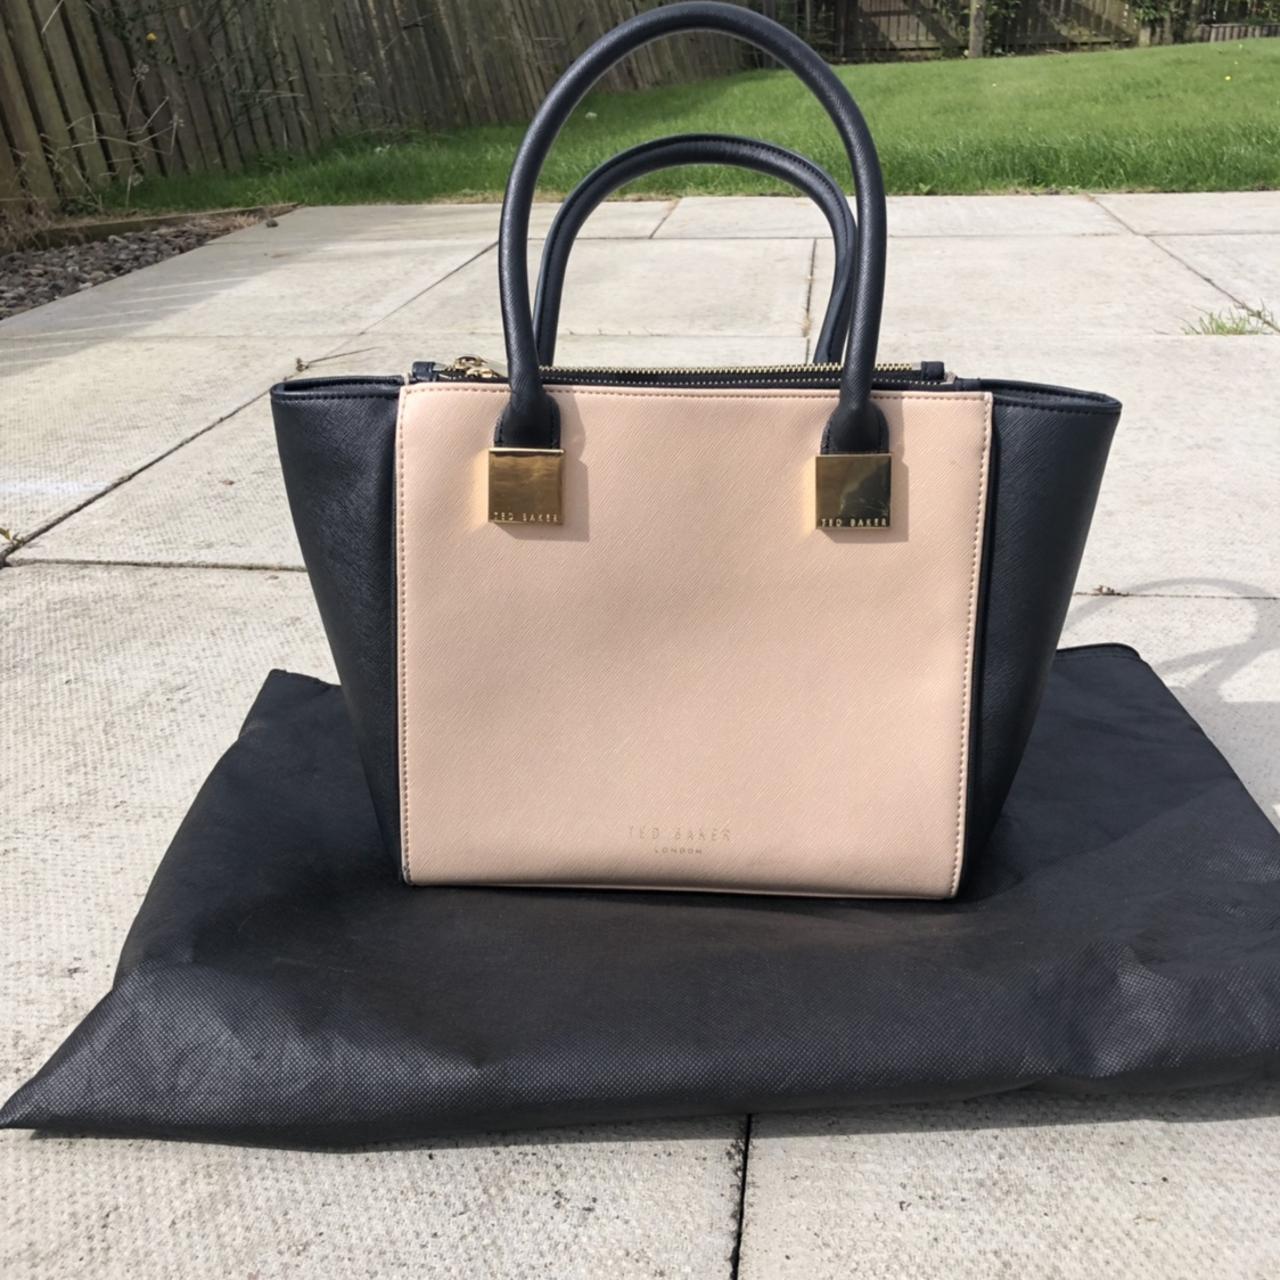 Ted Baker Crosshatch Leather Tote Bag in Black